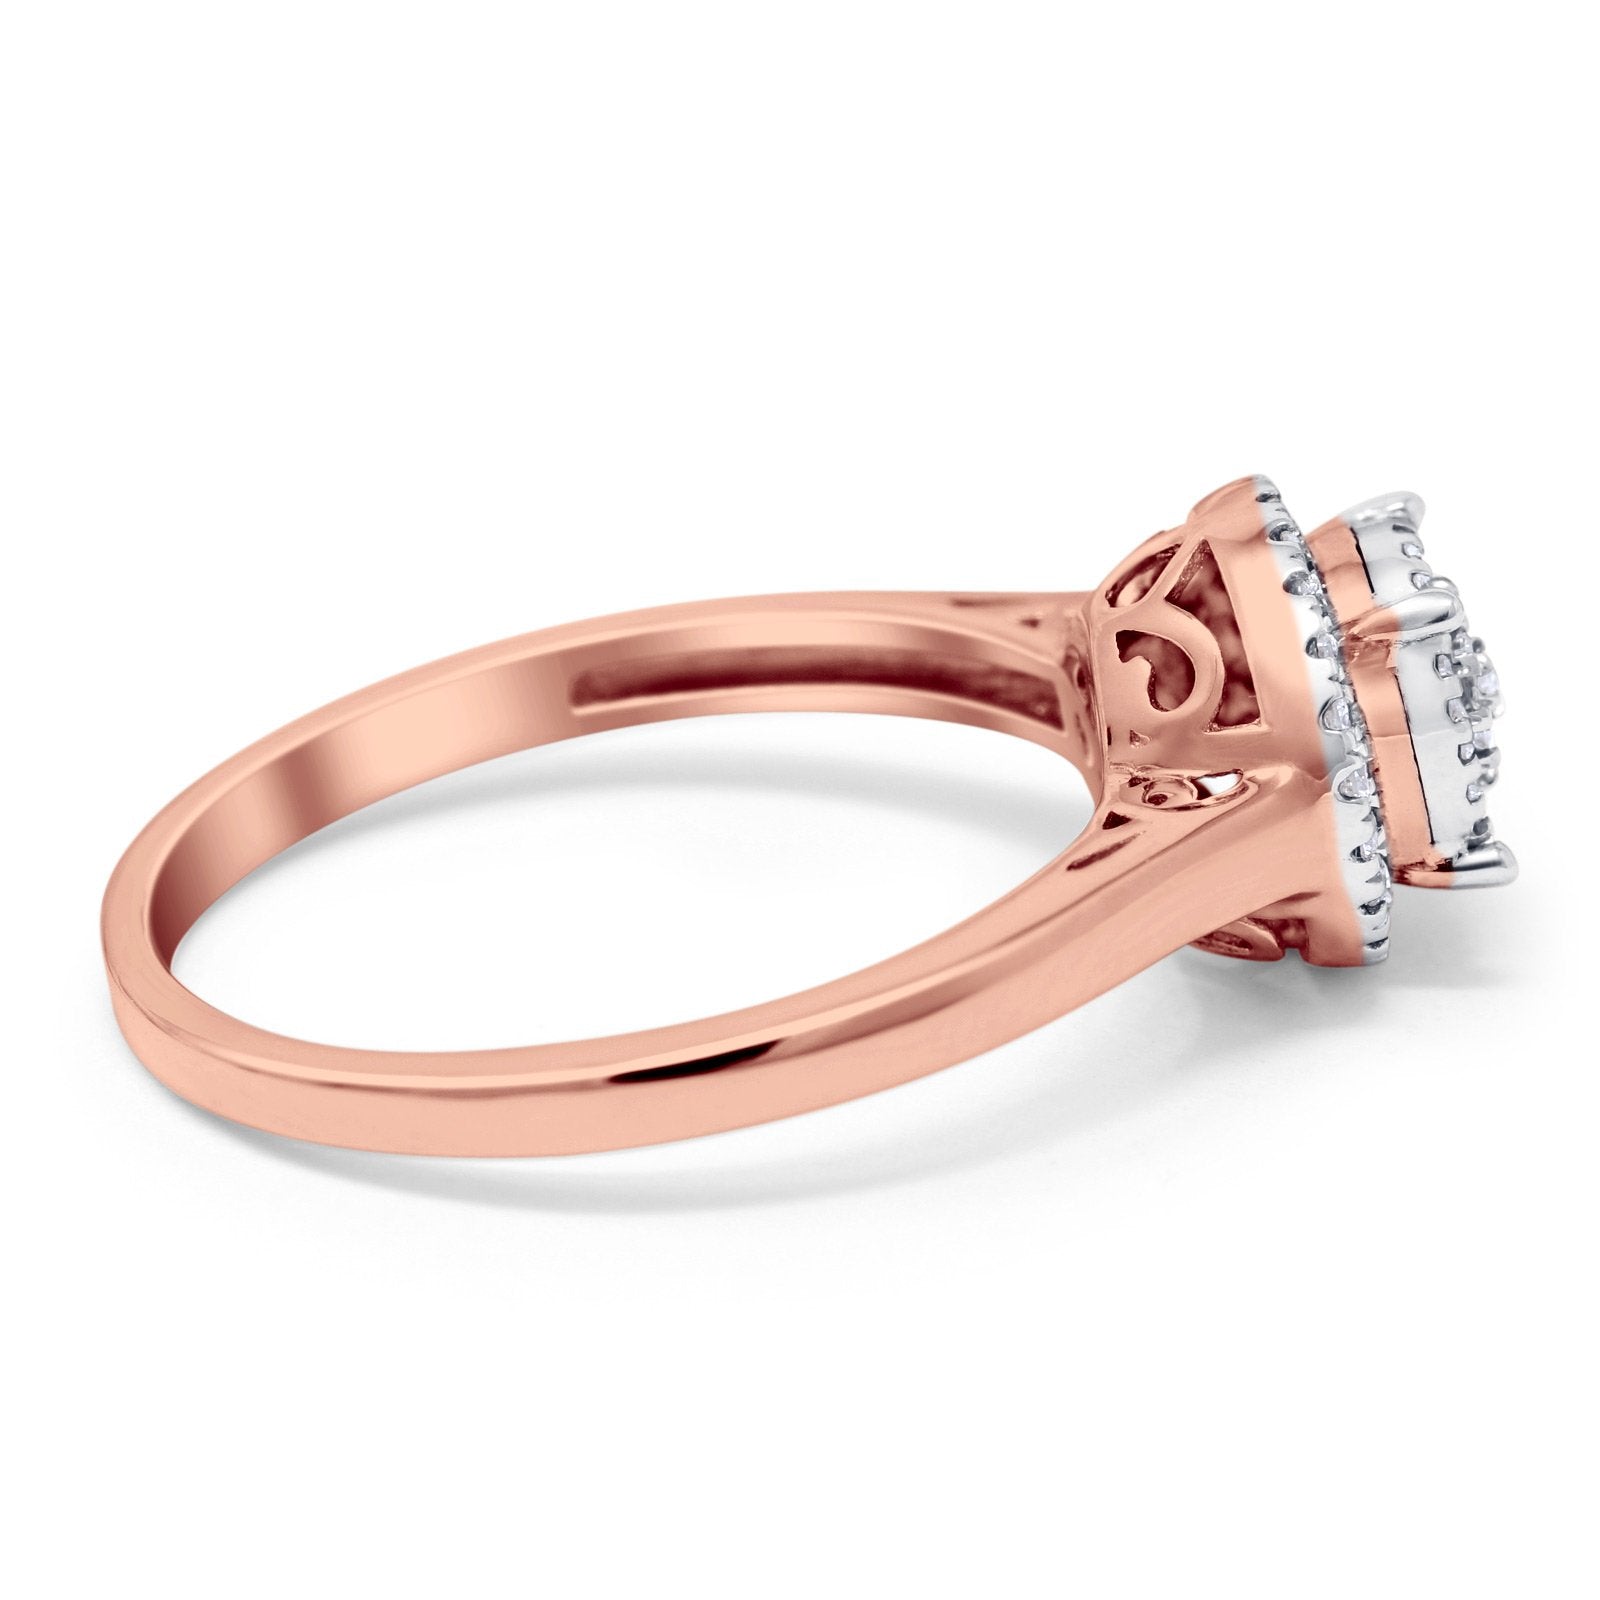 14K ROSE GOLD GUARD DIAMOND RING GUARD SIZE 6.5 WITH 38=0.55TW ROUND G-H  SI1-SI2 DIAMONDS - 001-125-00589